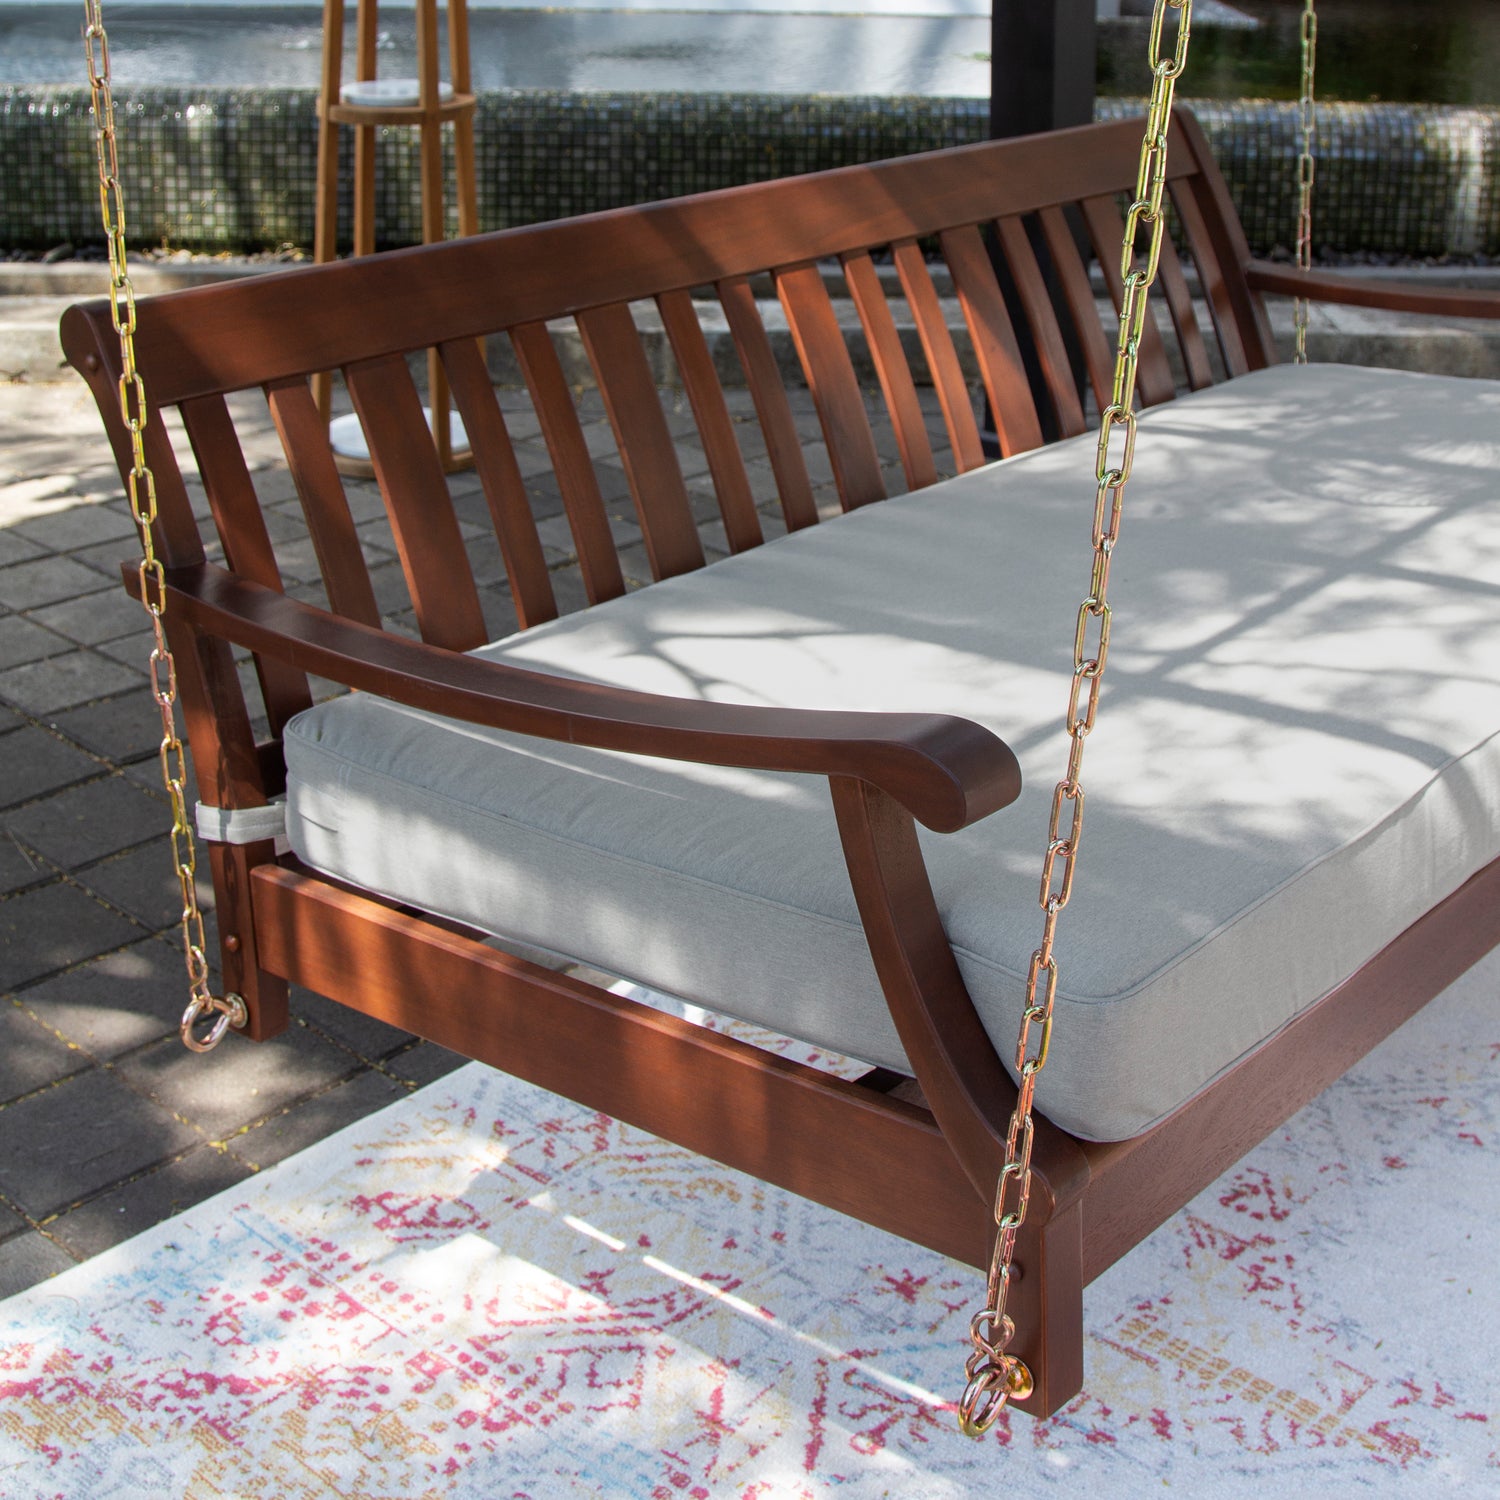 Maine Mahogany Wood Outdoor Swing Daybed with Oyster Cushion